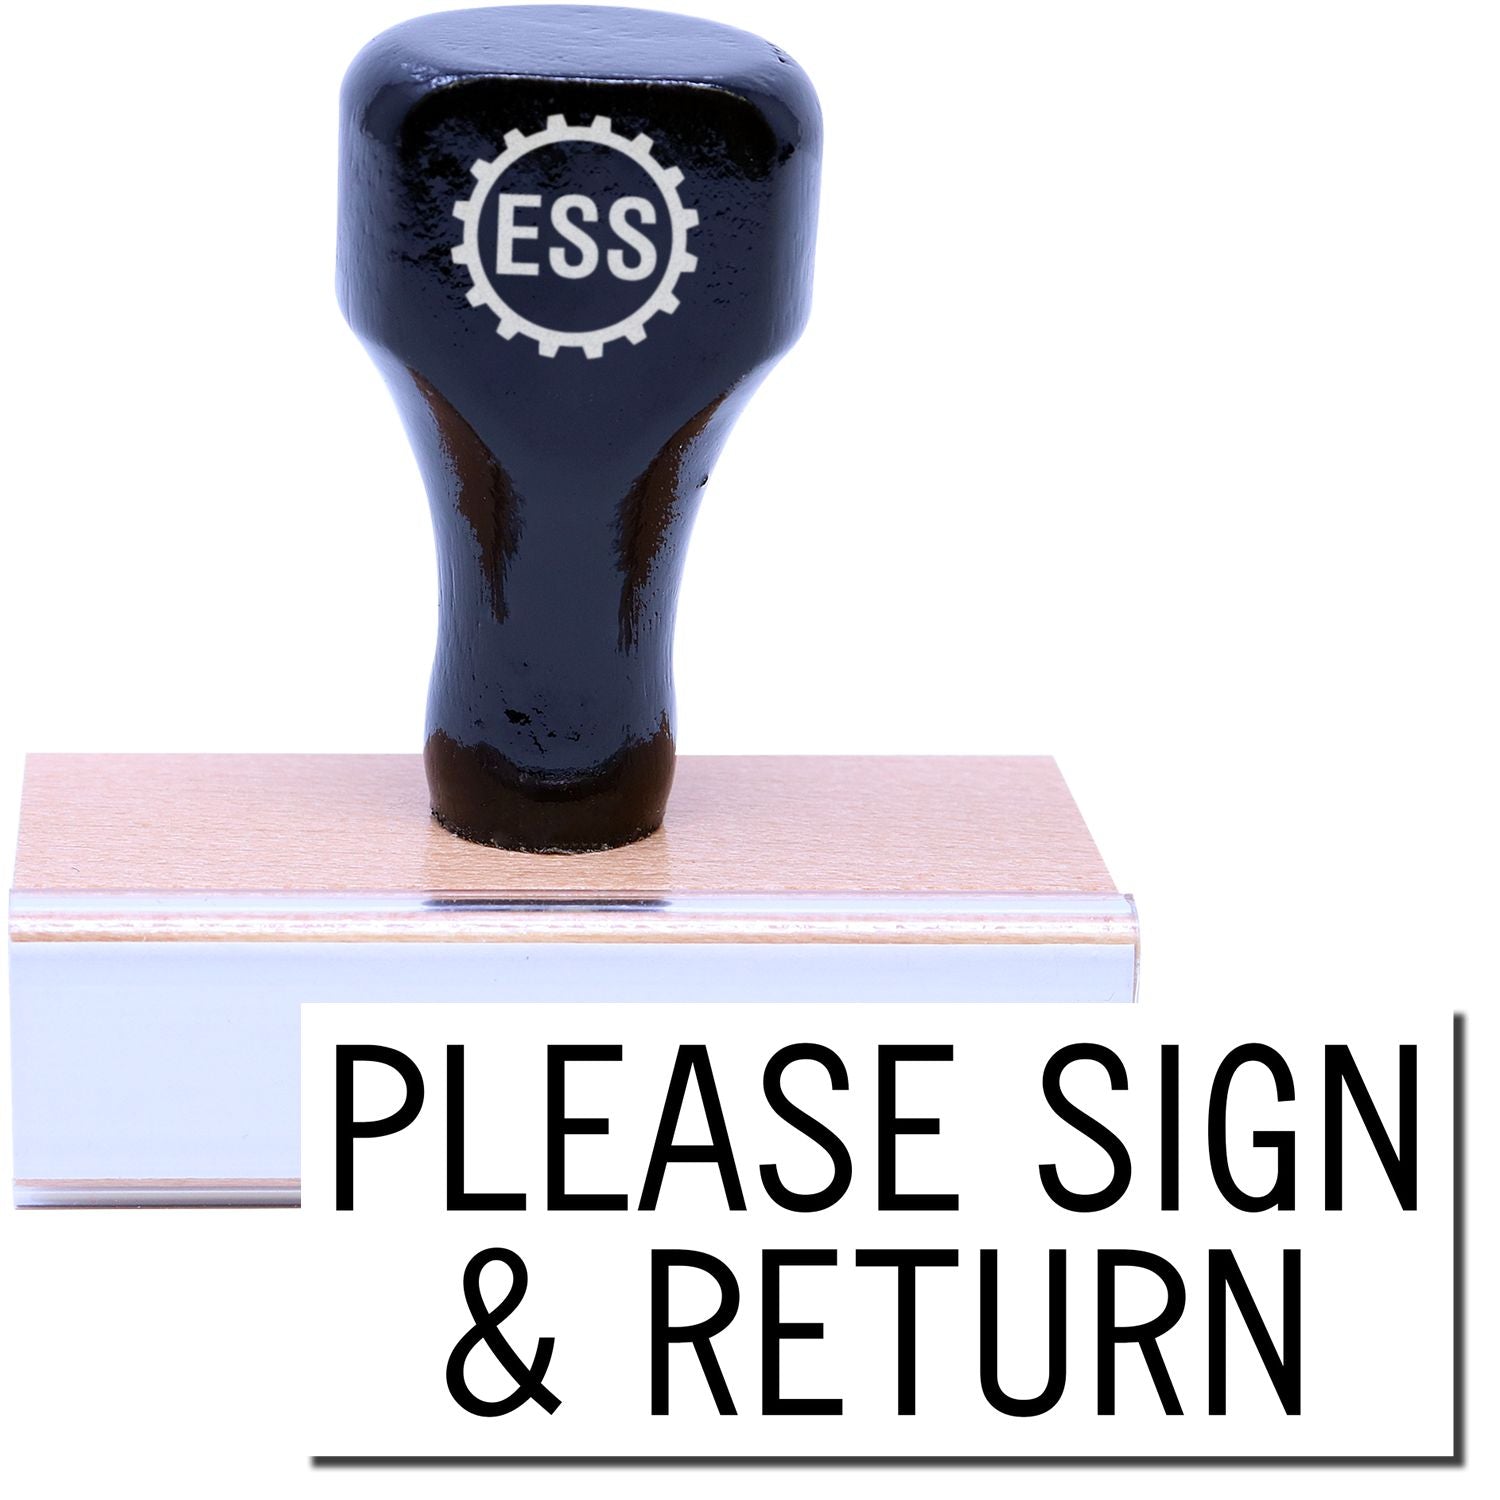 A stock office rubber stamp with a stamped image showing how the text "PLEASE SIGN & RETURN" in a large font is displayed after stamping.